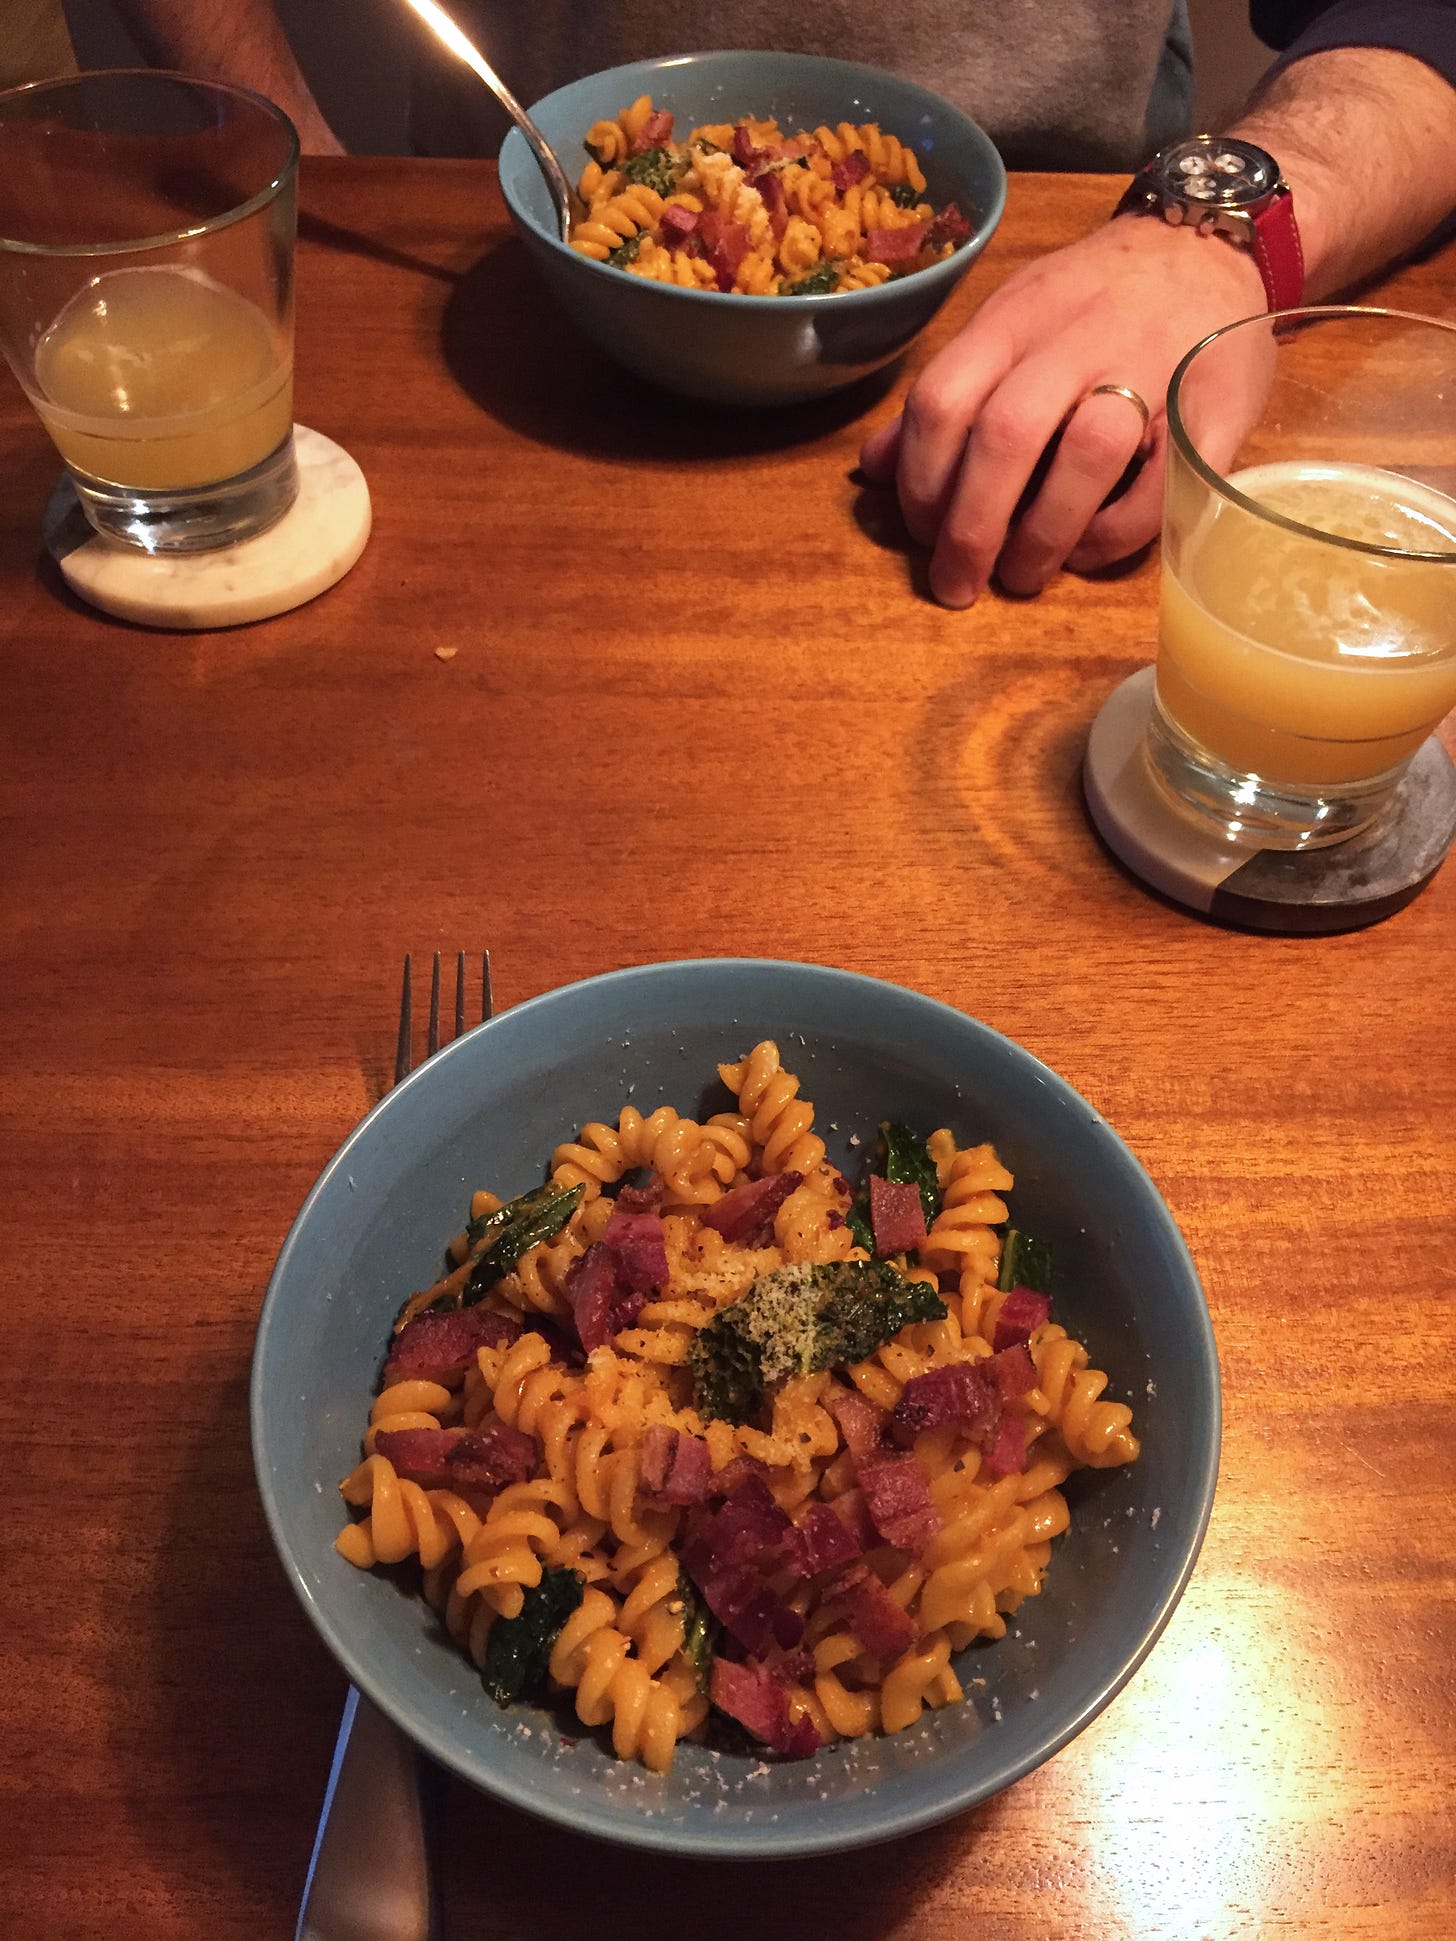 Across from each other on a table are two blue bowls filled with fusilli in vodka sauce, with pieces of kale throughout. A crumble of bacon is sprinkled across the top of each dish. On coasters are two partially-empty glasses of beer.